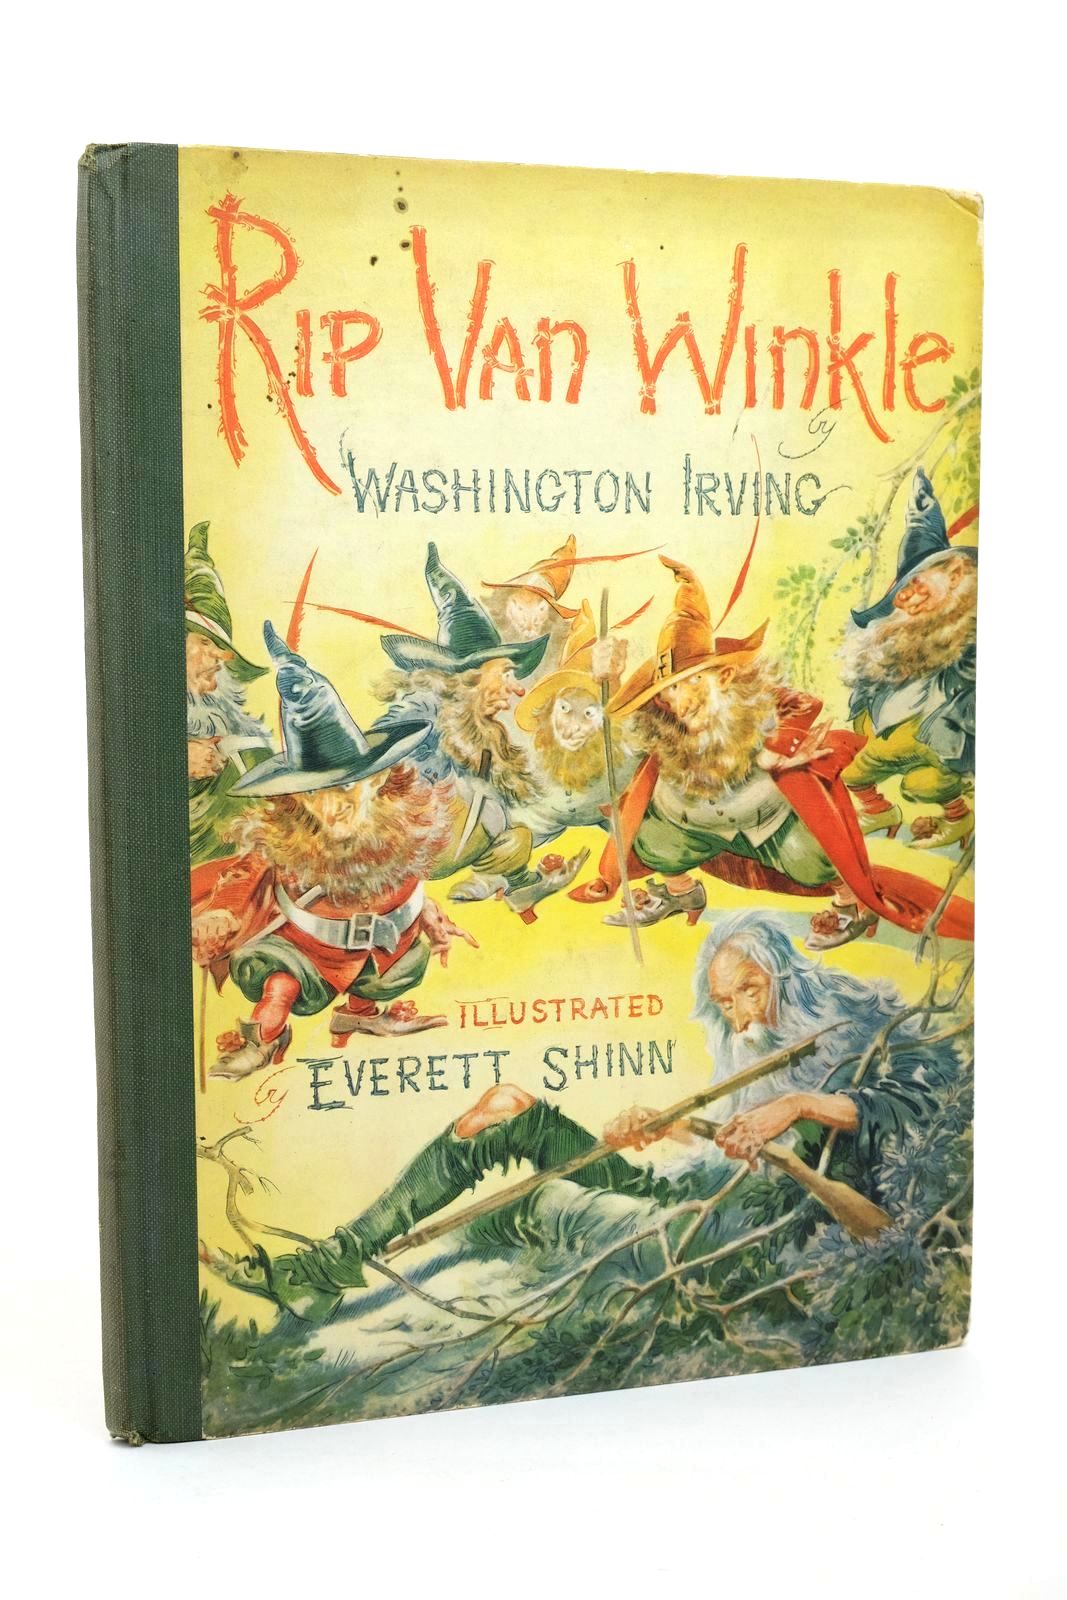 Photo of RIP VAN WINKLE written by Irving, Washington illustrated by Shinn, Everett published by Garden City Publishing Company, Inc. (STOCK CODE: 1323016)  for sale by Stella & Rose's Books